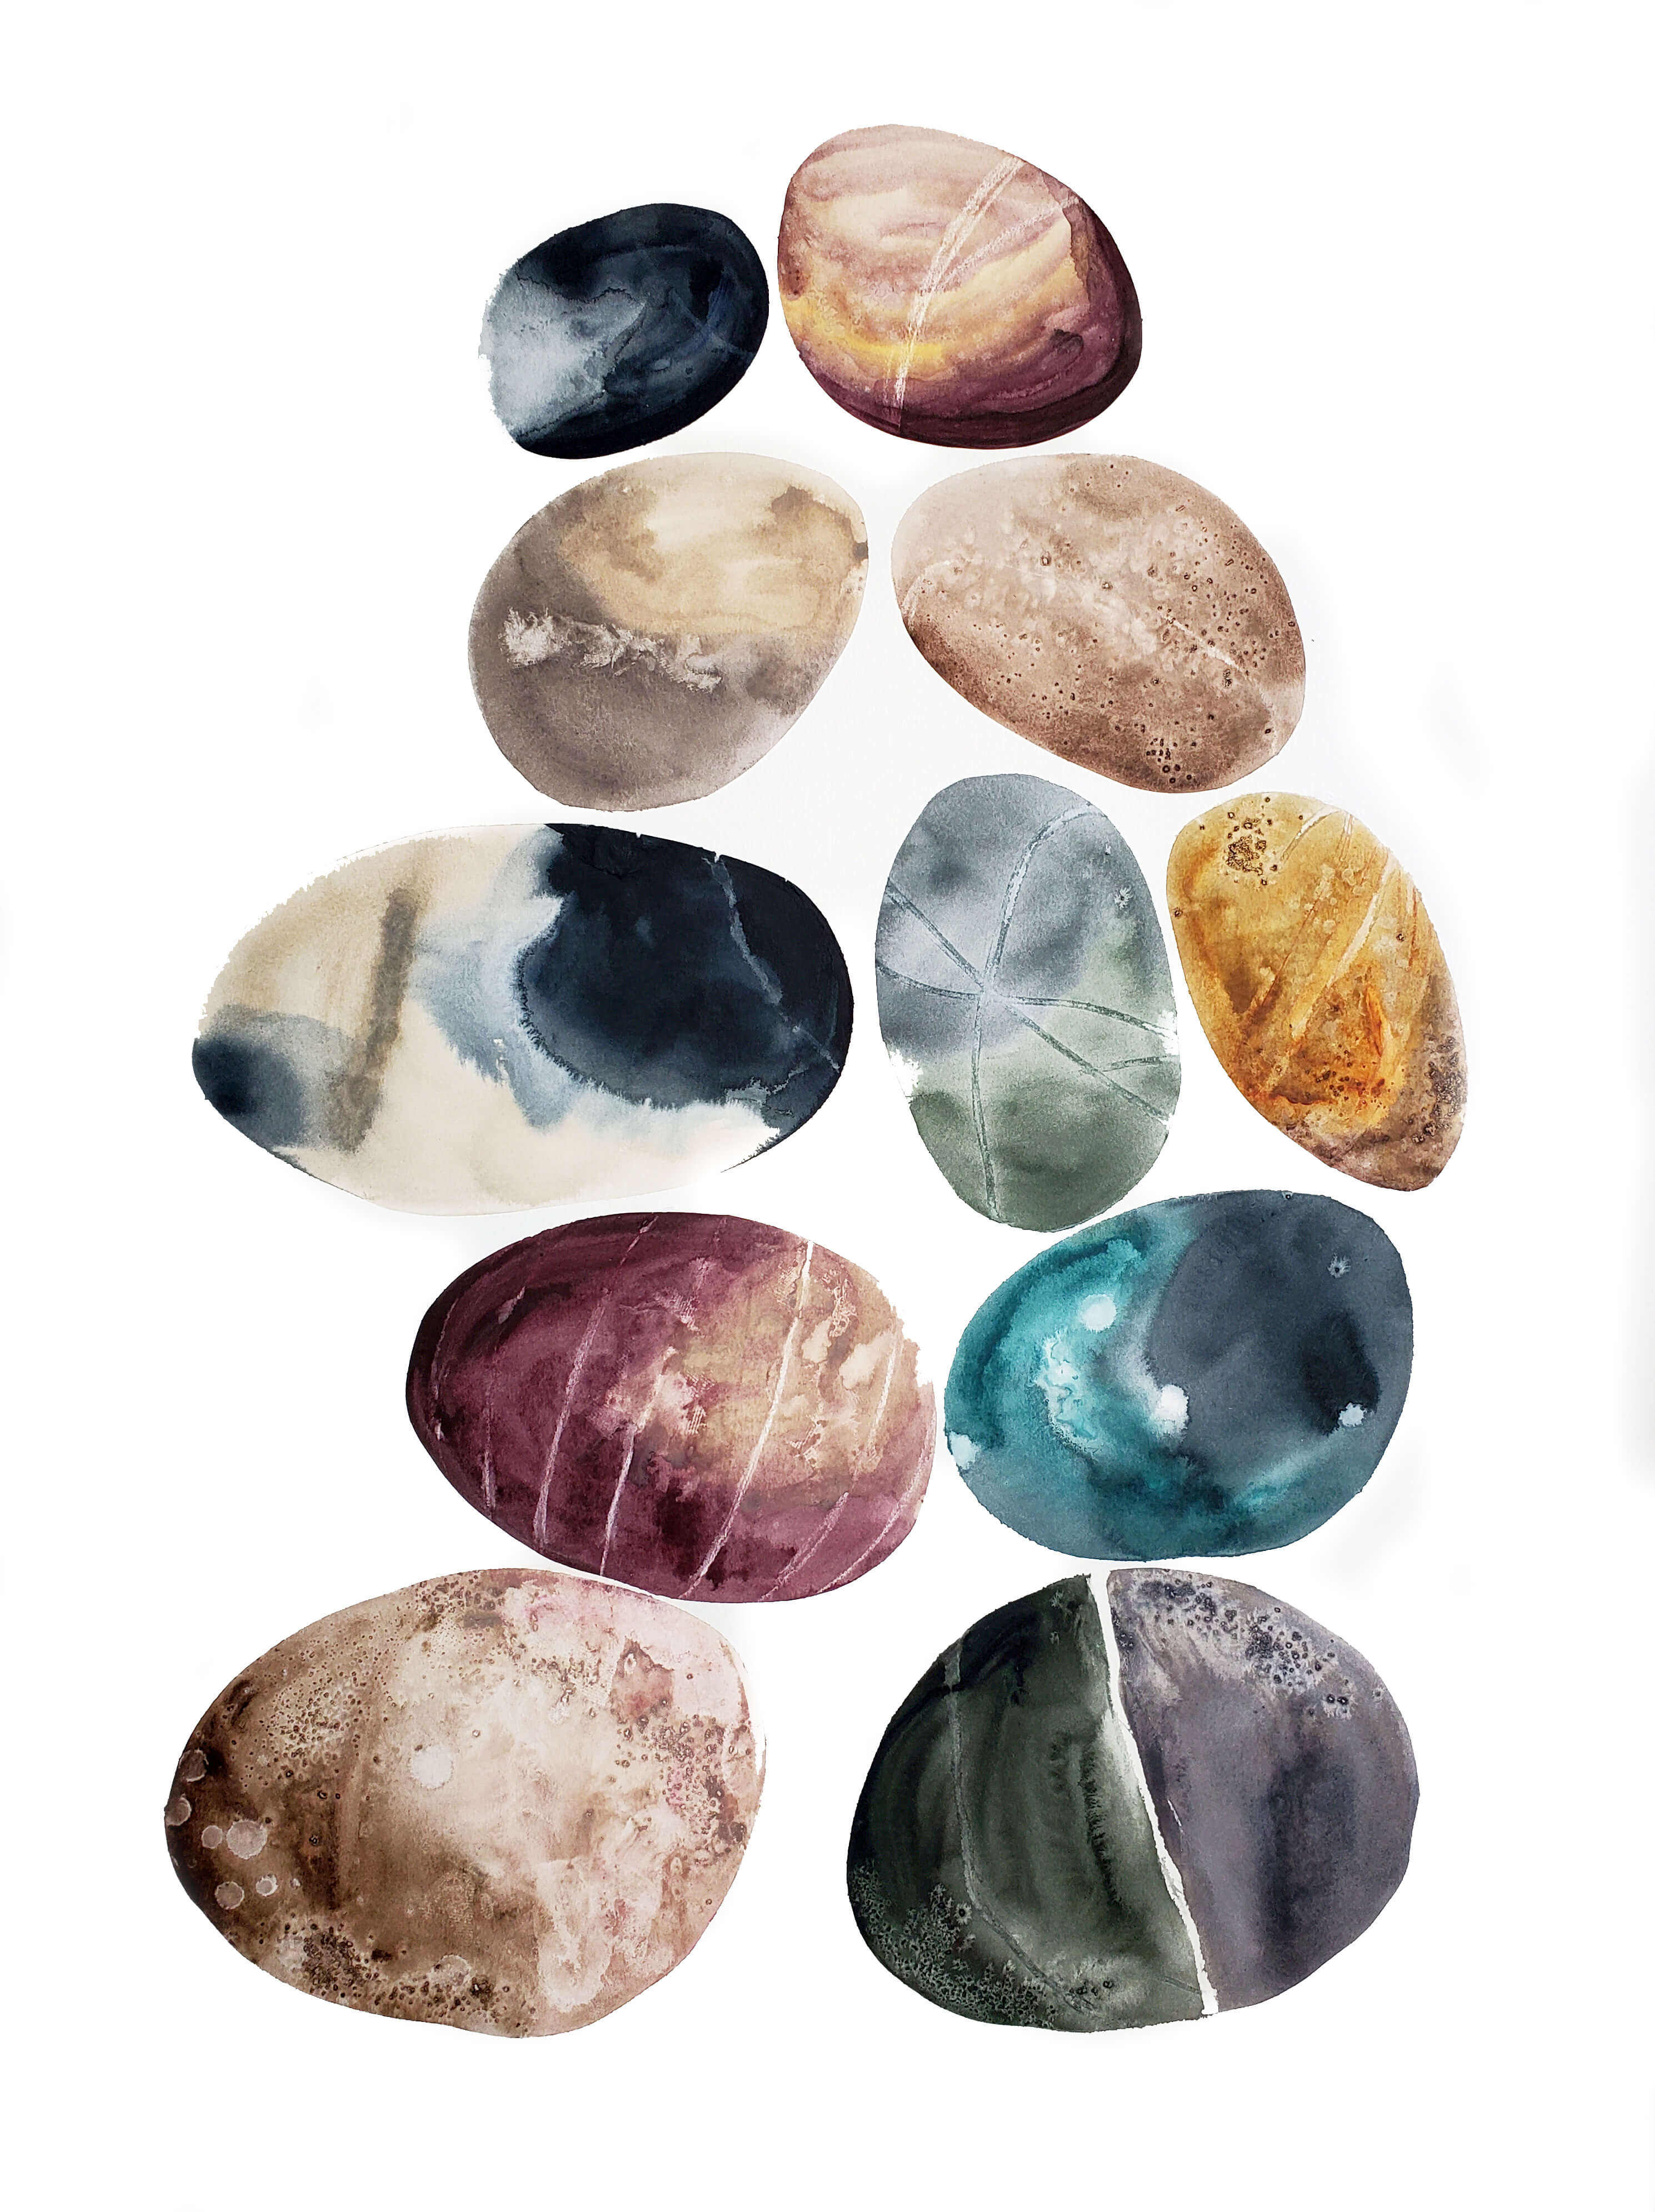 egg shaped stones painted on a white background